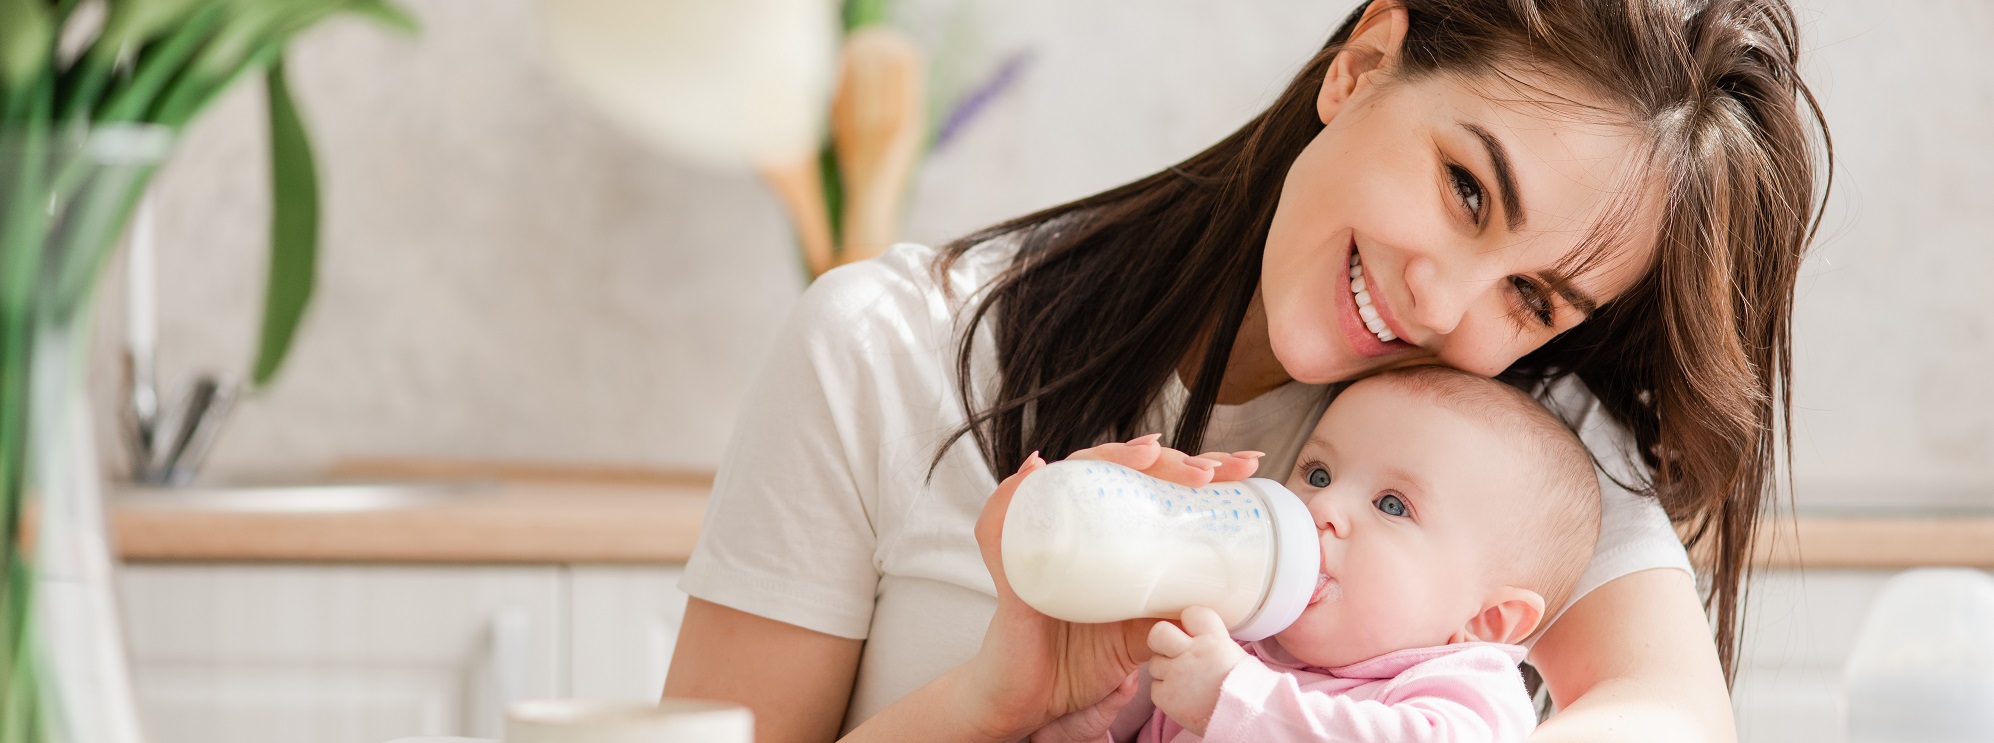 introducing breastfed baby to formula